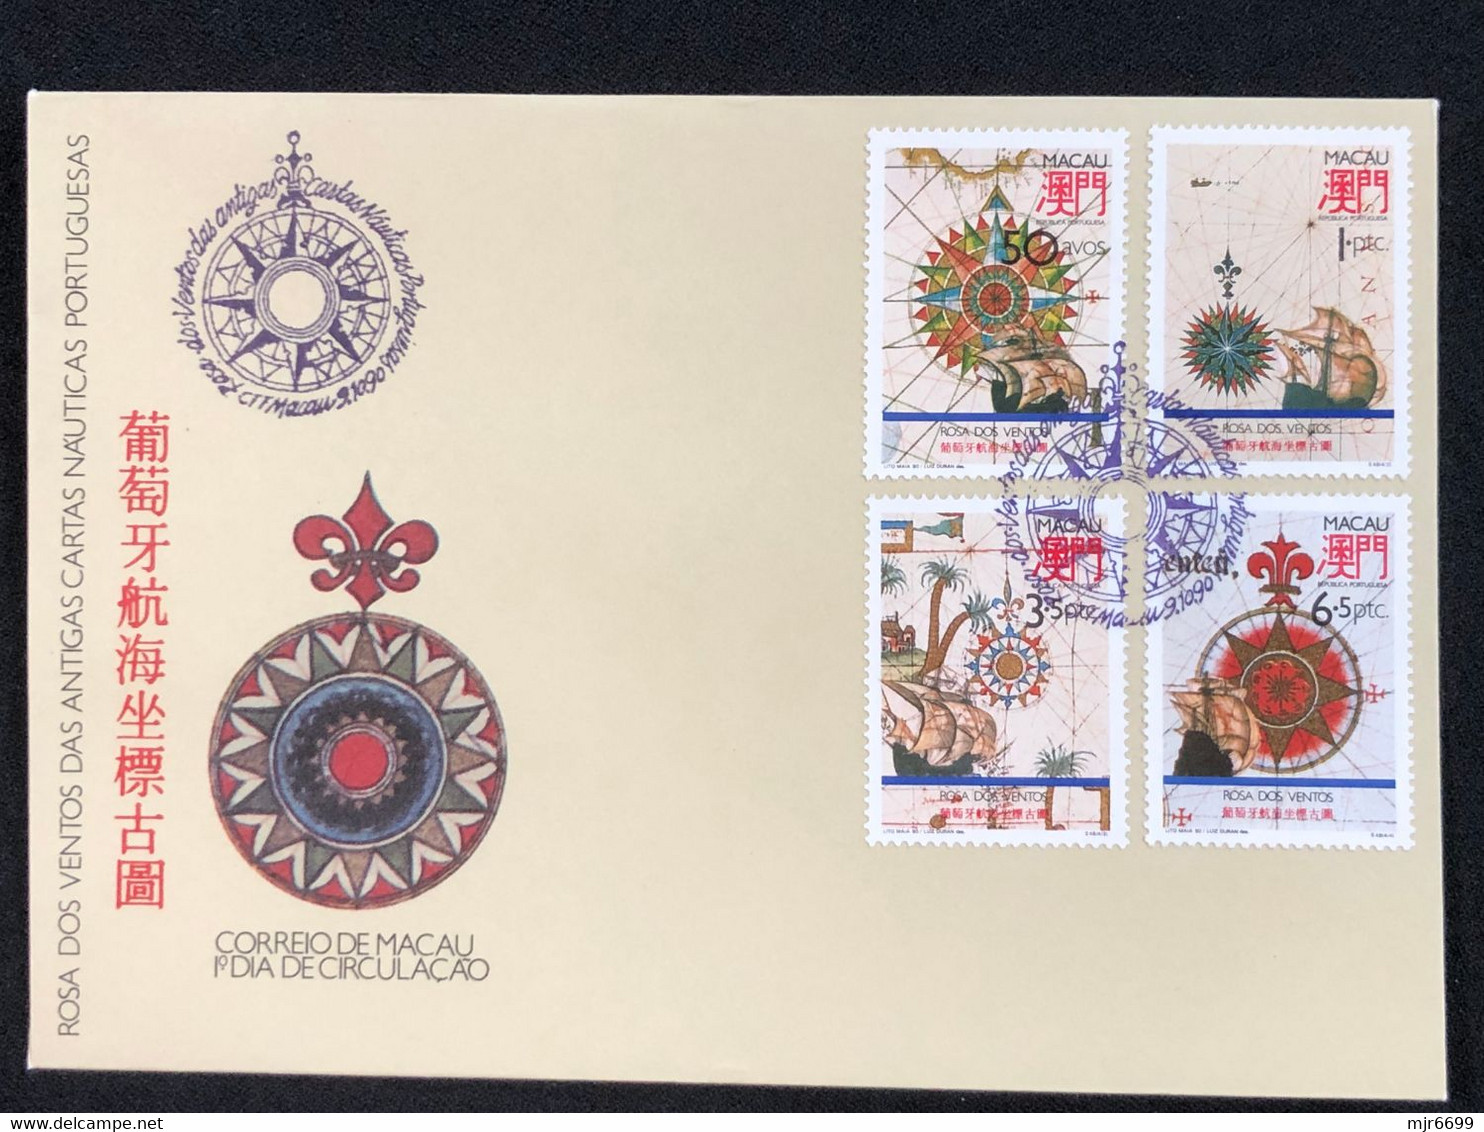 MACAU 1990 ROSES OF THE WINDS FROM OLD PORTUGUESE NAUTICAL CHARTS FDC - FDC